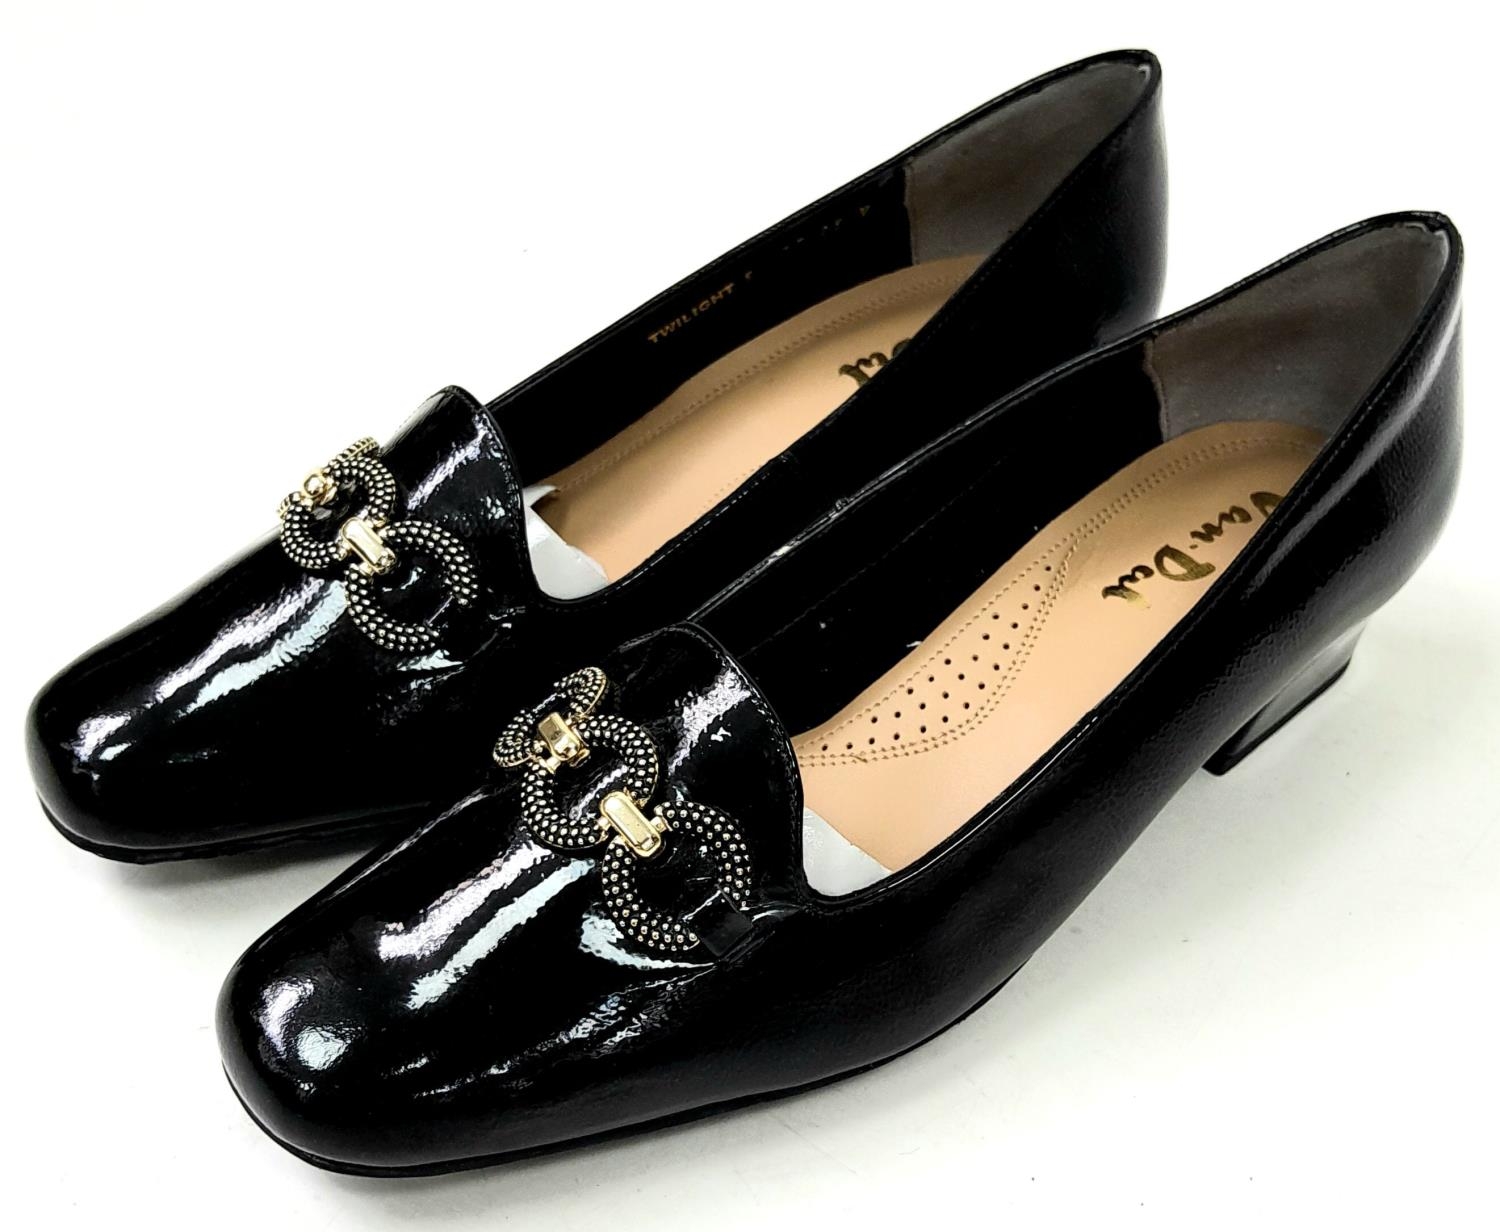 An Unused pair of "Twilight" lacquered ladies shoes by Van Dal, Size 5 ,1.5" heel. In box. - Image 2 of 10